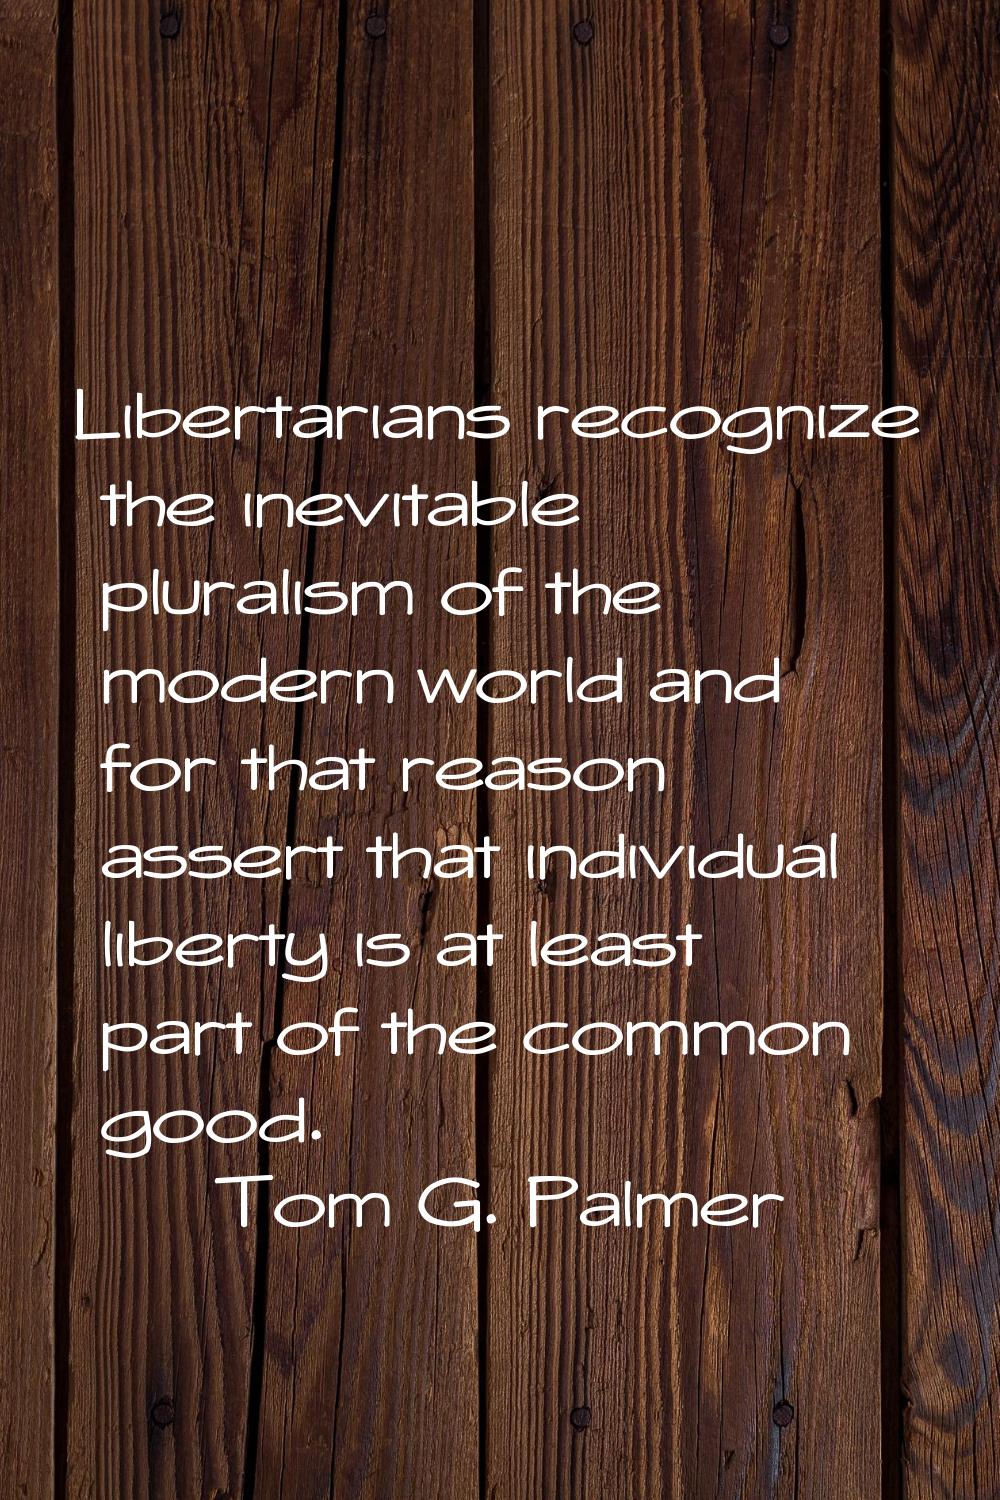 Libertarians recognize the inevitable pluralism of the modern world and for that reason assert that